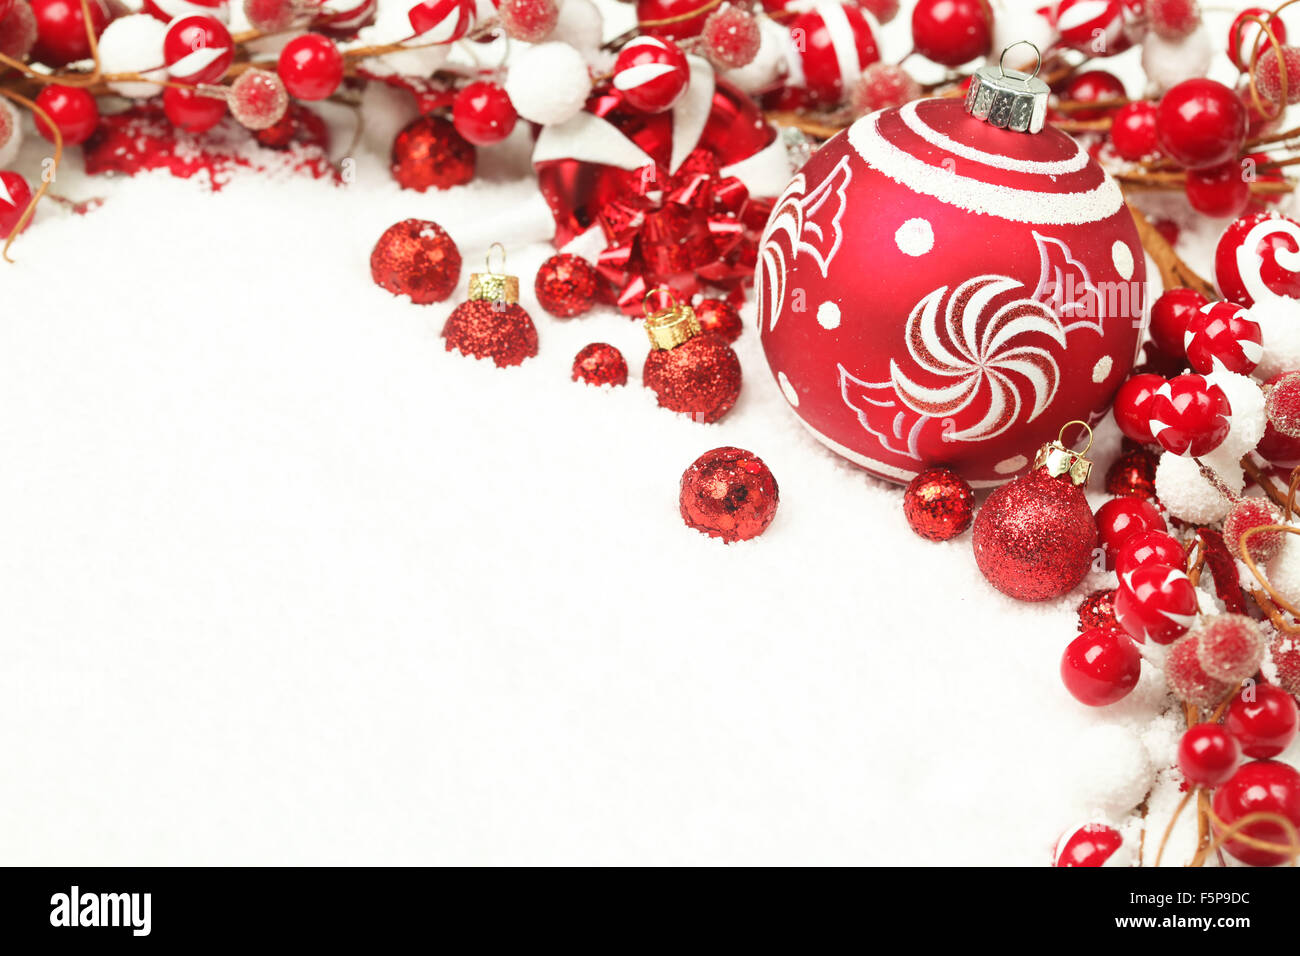 Red and white Christmas decoration background Stock Photo